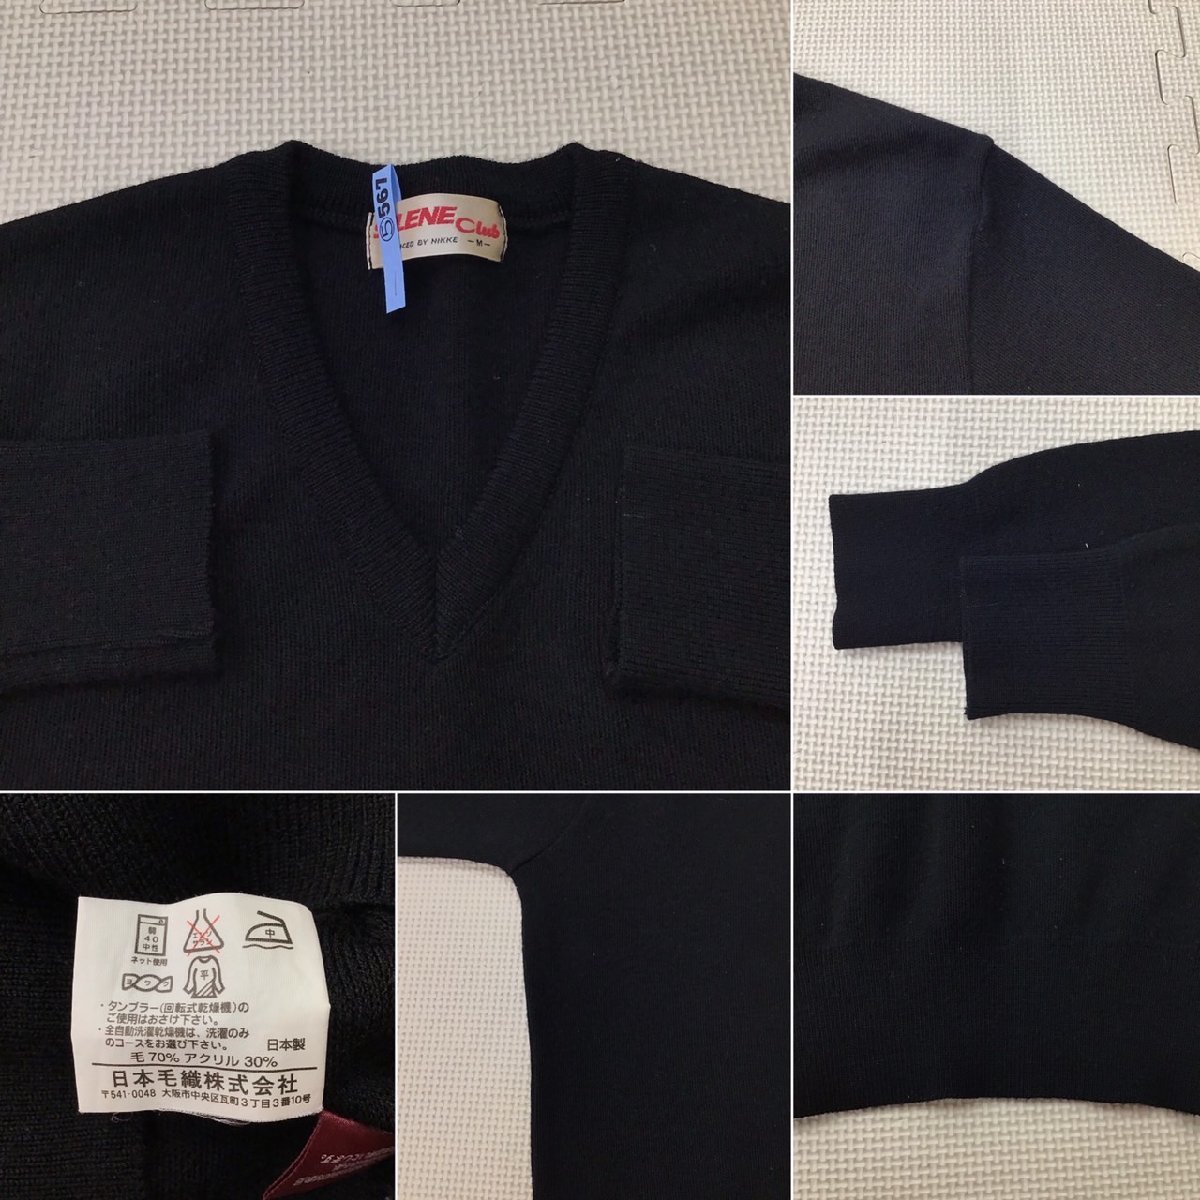 O298/T( used ) Tochigi direction uniform 2 point /. name unknown /M/ sweater / knitted the best /SELENE Clube/ALTBLOW CLASSIC/ winter / black / navy blue / school uniform /. industry raw goods / man and woman use 